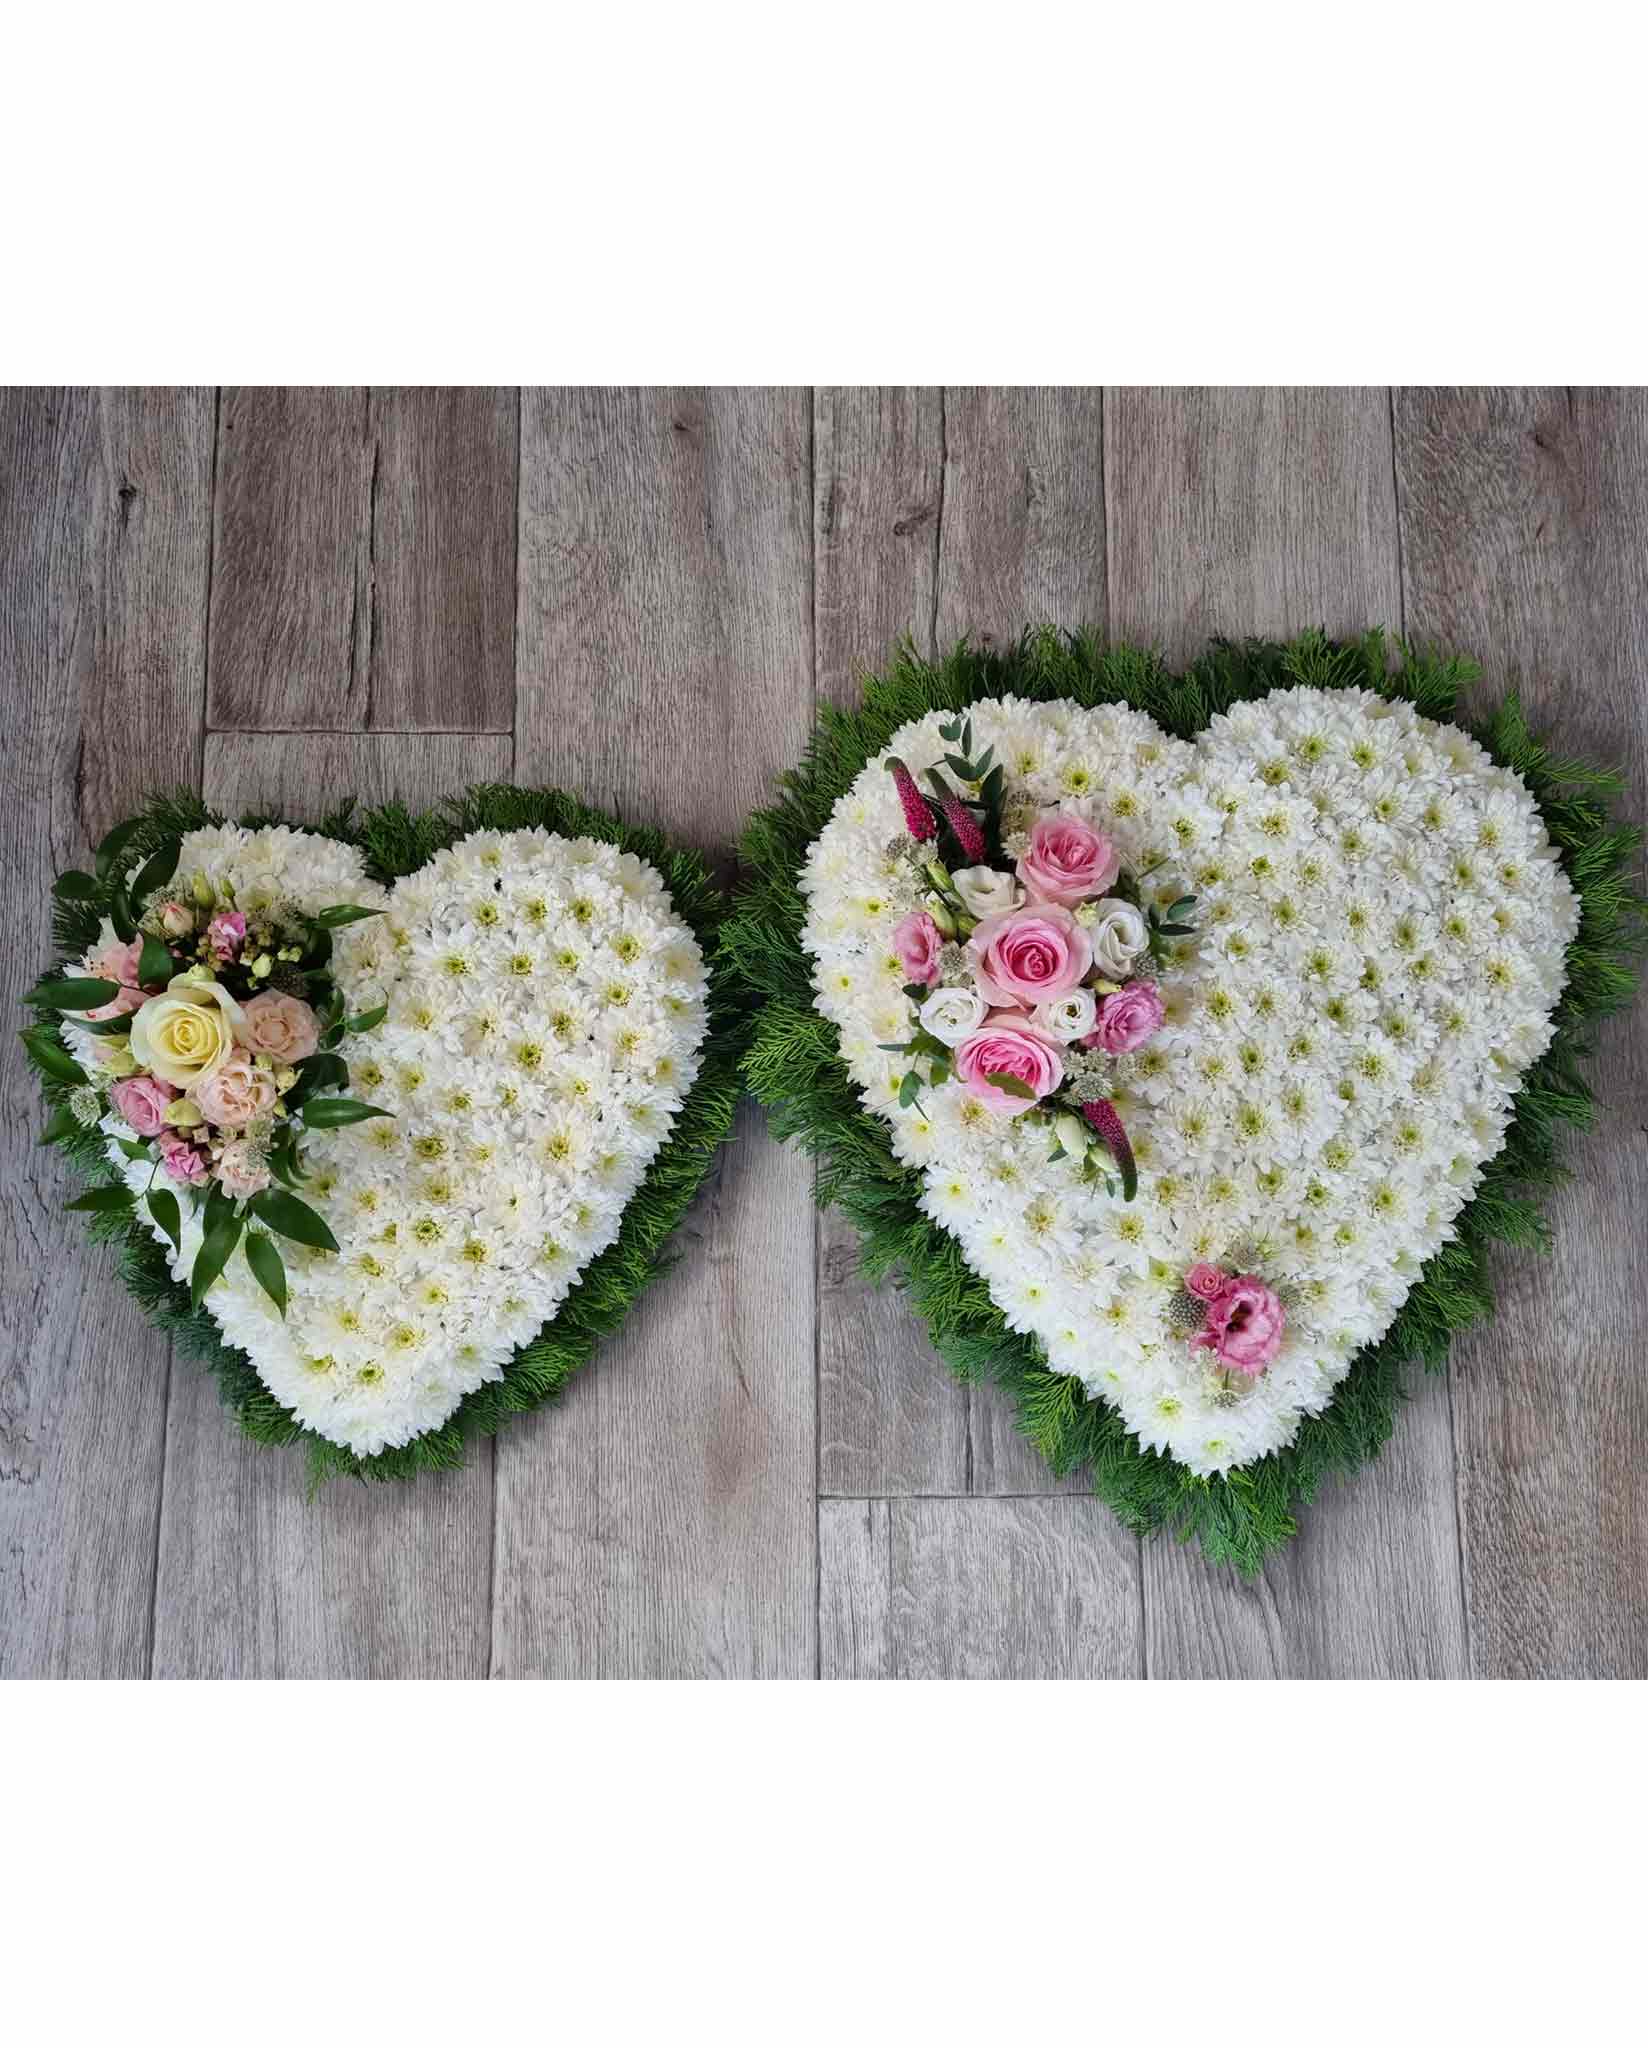 Funeral flowers heart wreath Tipperary